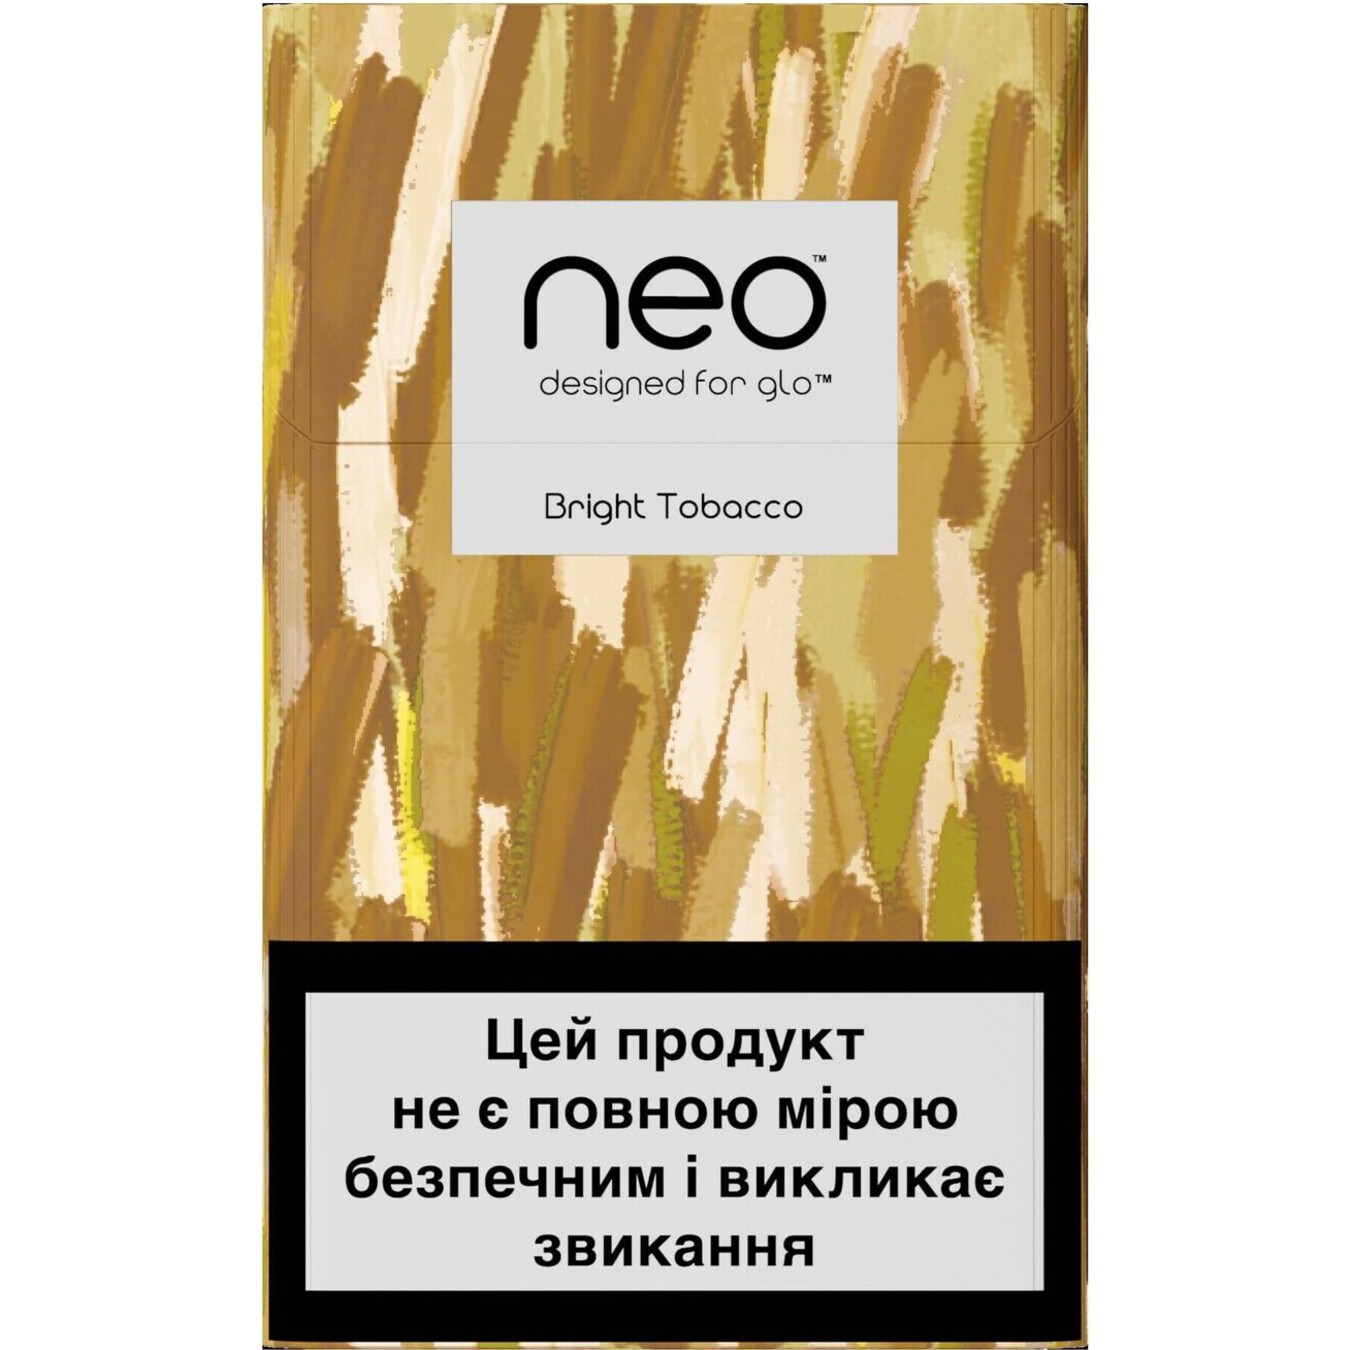 Neo Demi Bright Tobacco Sticks (the price is indicated without excise tax)